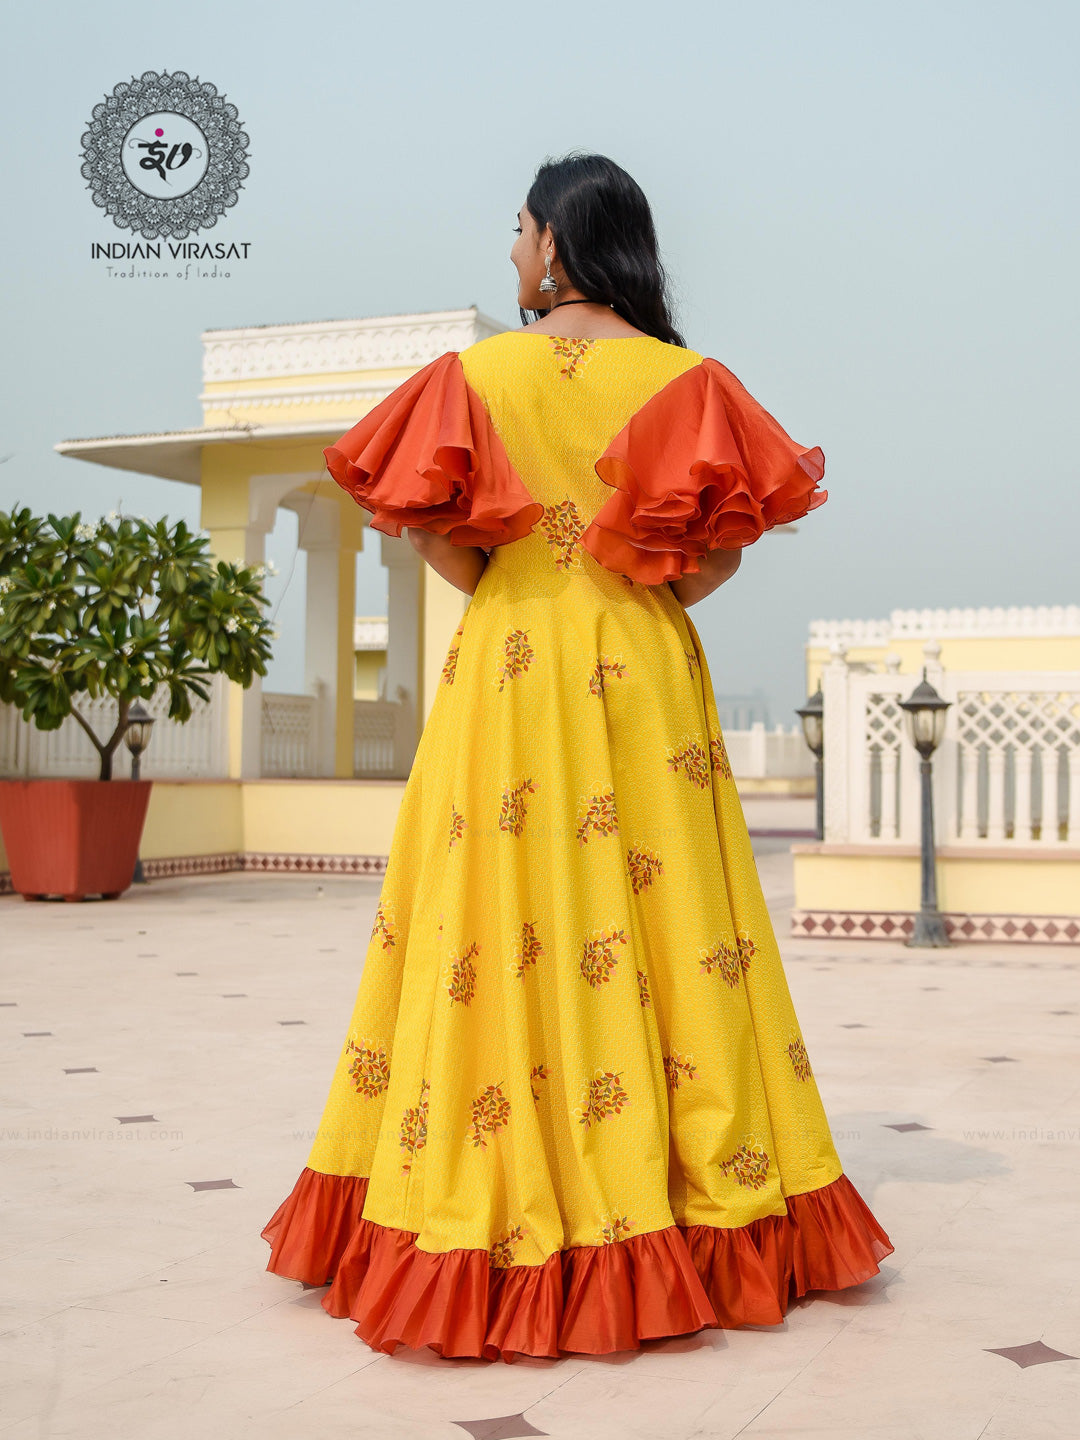 Designer Stitched Western Dress Light Yellow Net Long Gown SC1048 –  Ethnic's By Anvi Creations